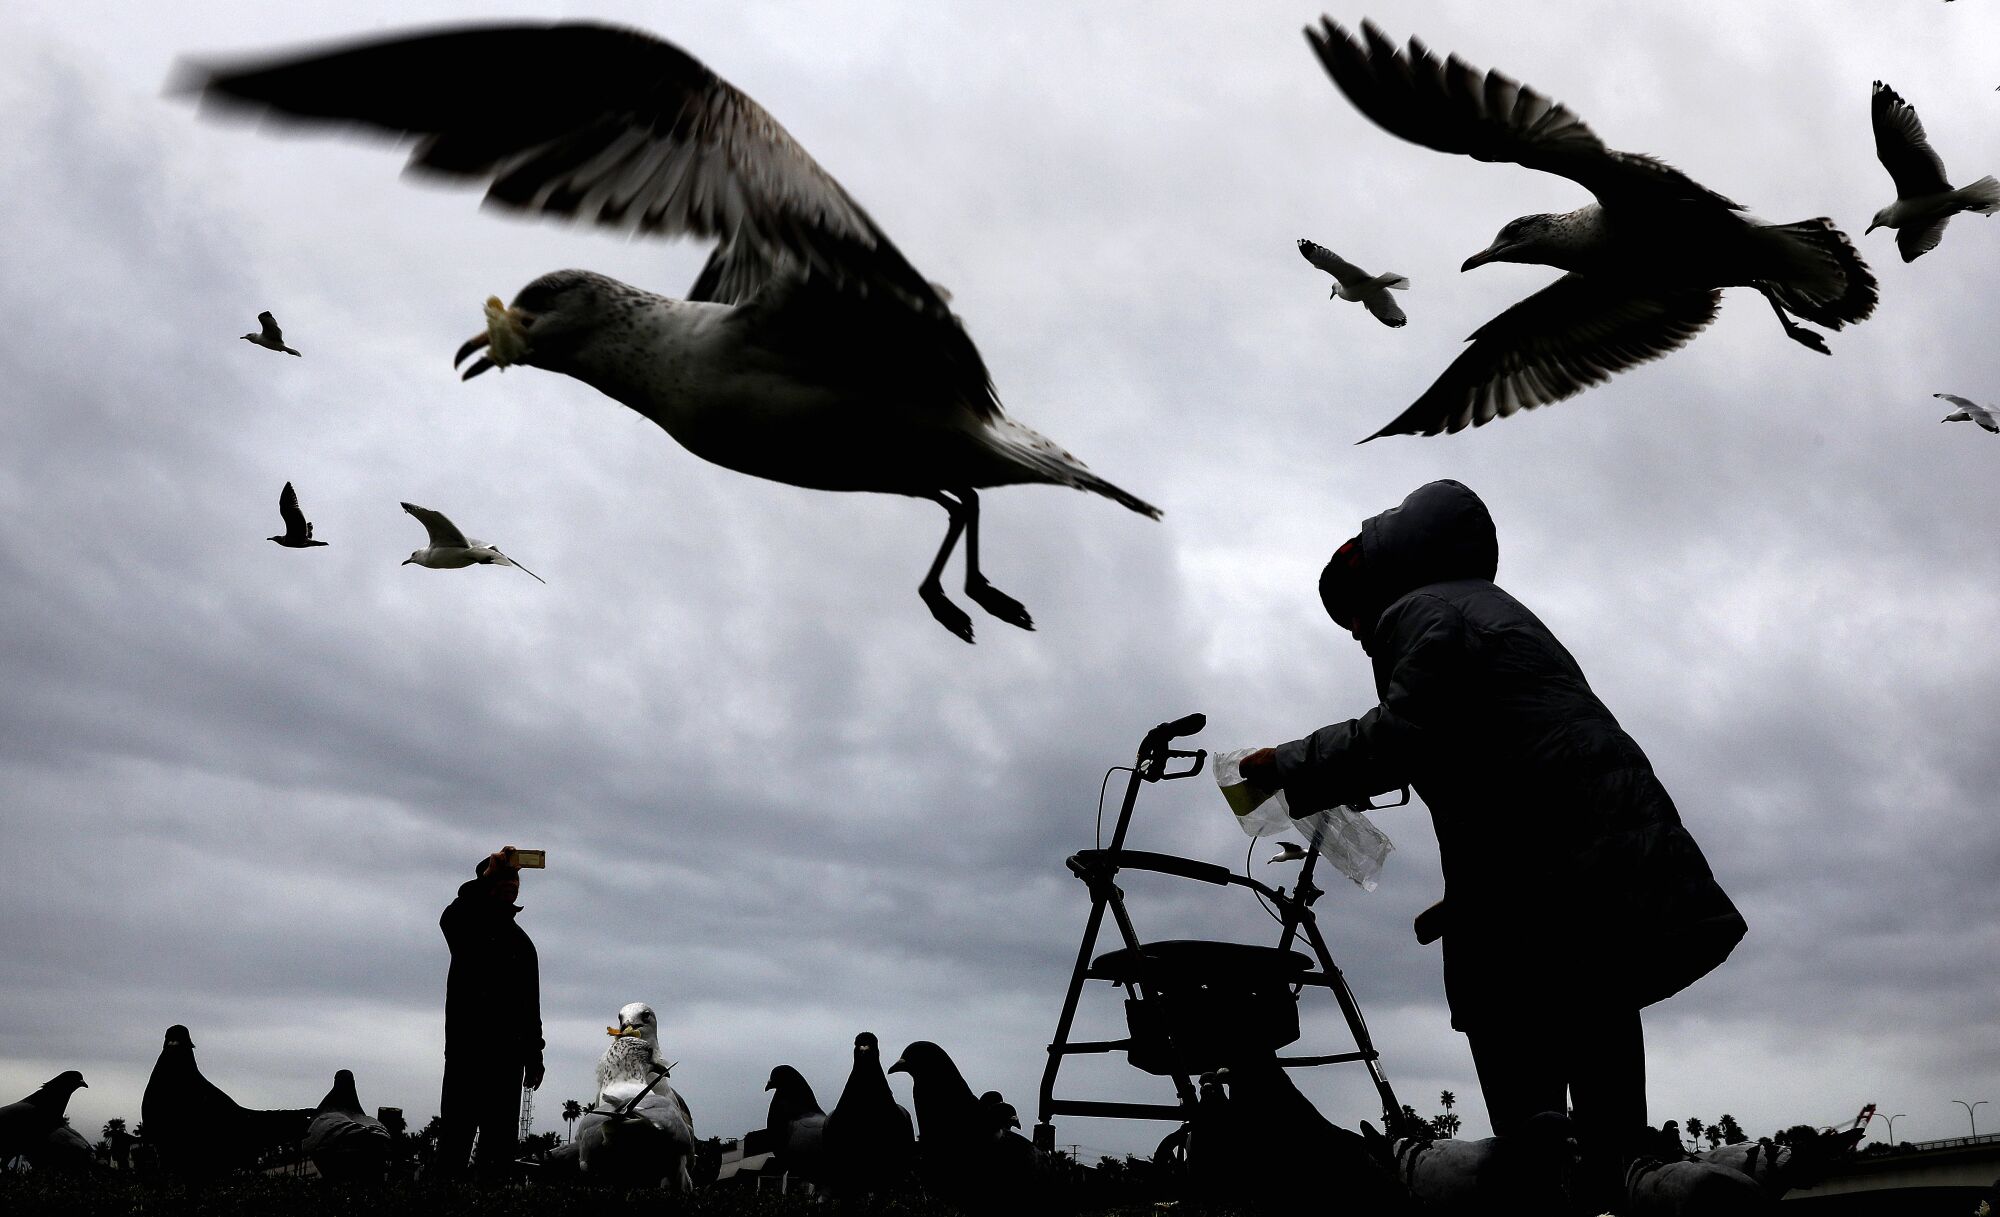 Seen in silhouettes against cloudy, dark-grey sky, two people feed swarming seagulls.  